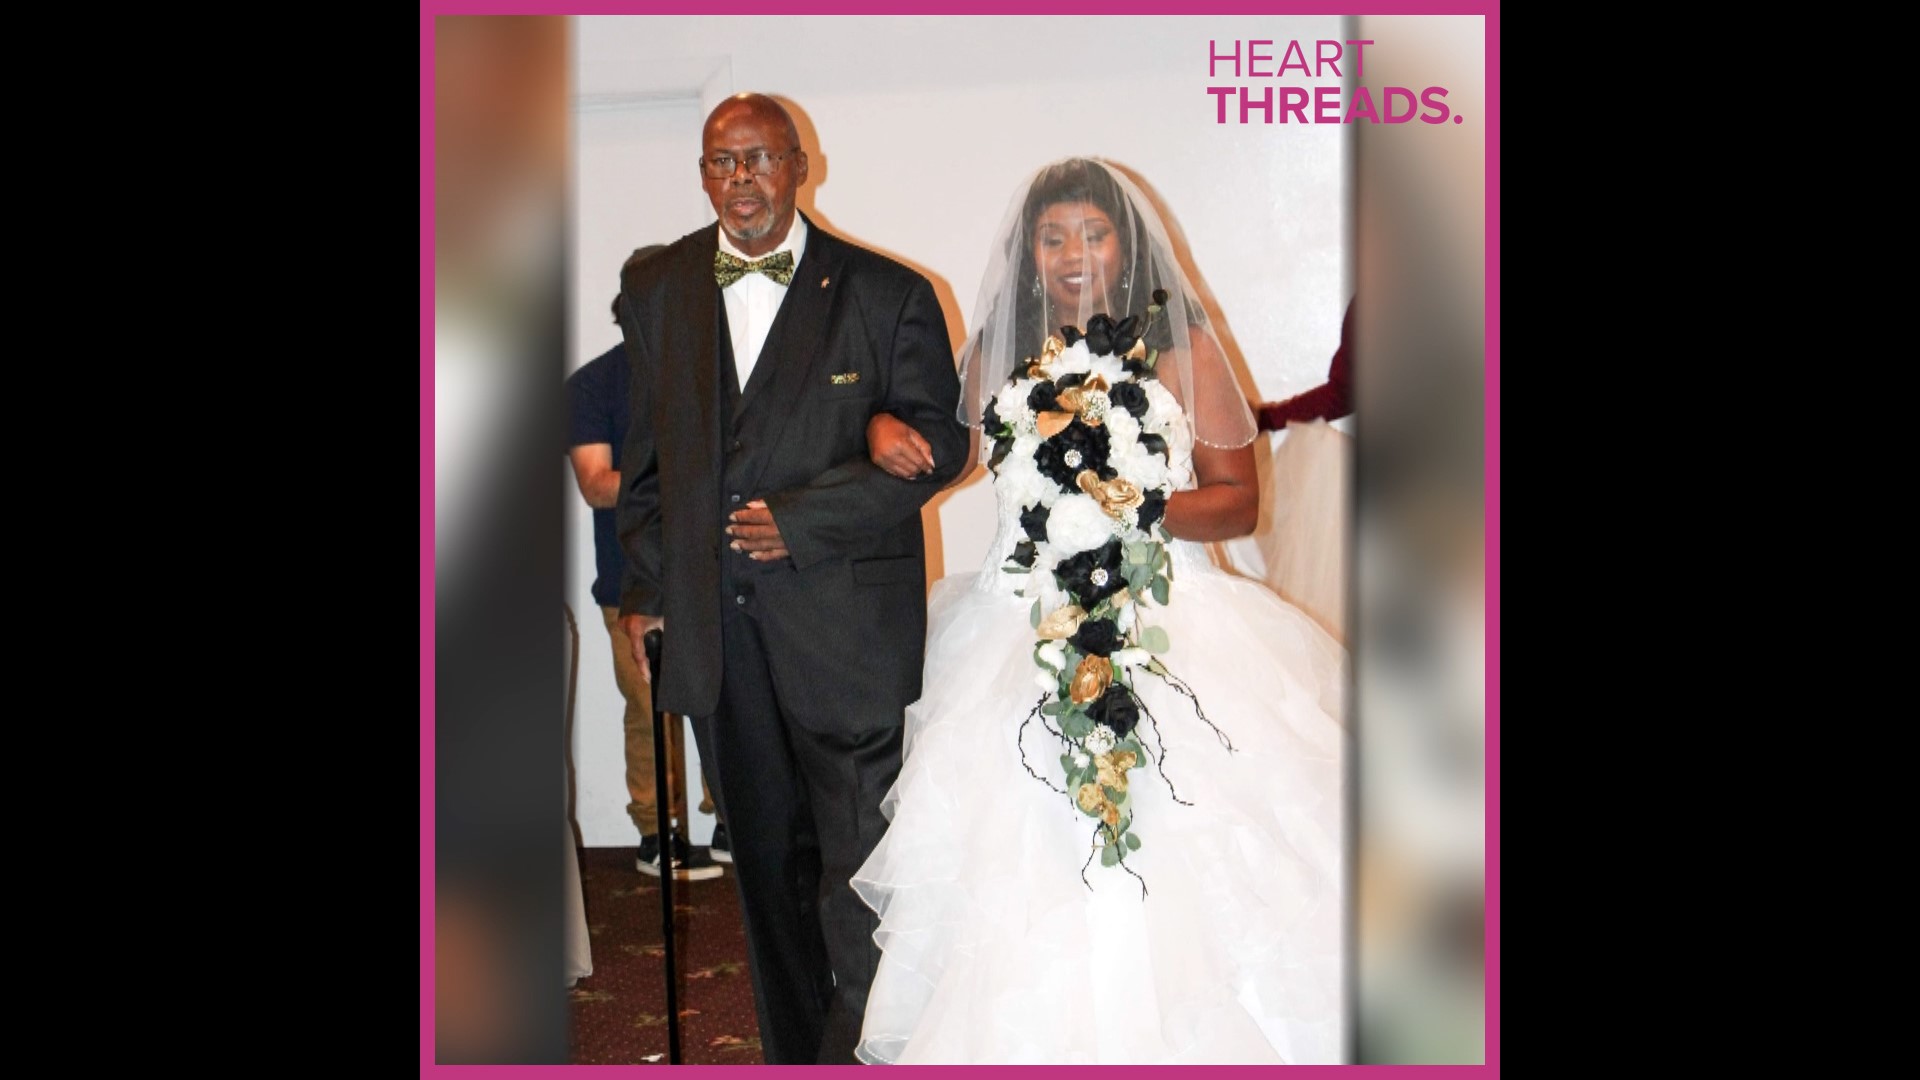 Jordeen had lost her mom and was afraid of losing her dad to kidney failure. Fortunately, he got a life-saving transplant just in time for her wedding.